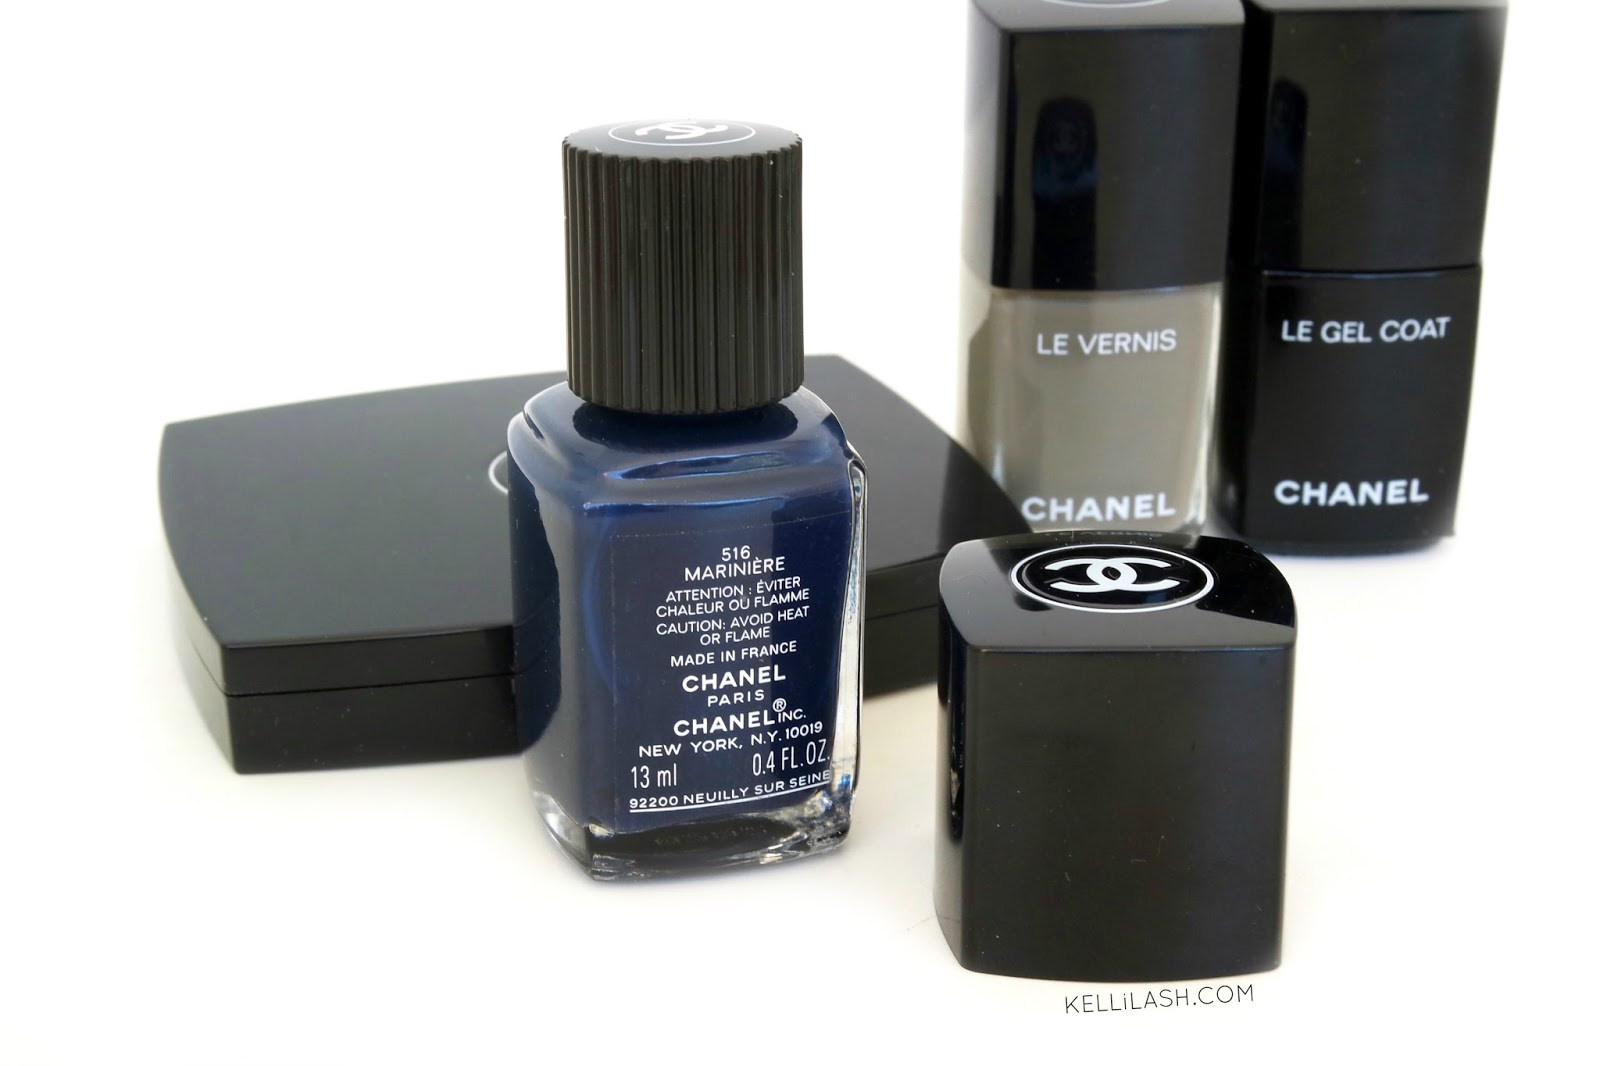 Chanel Le Vernis Longwear Nail Colour in "Frenzy" 2024 - wide 7